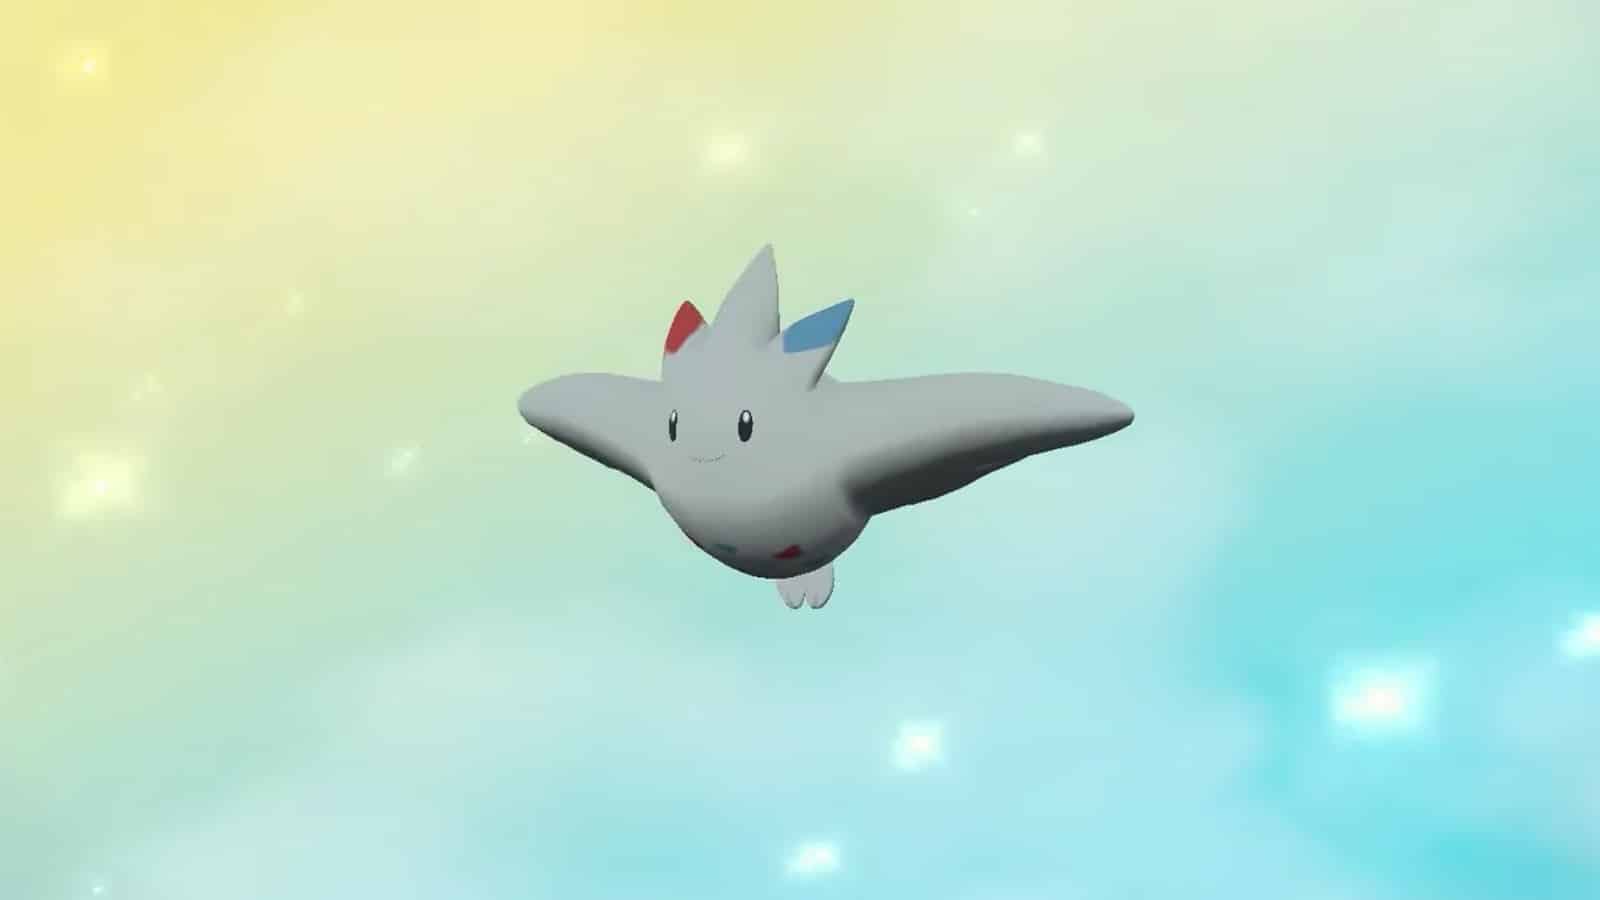 Togetic evolving into Togekiss 